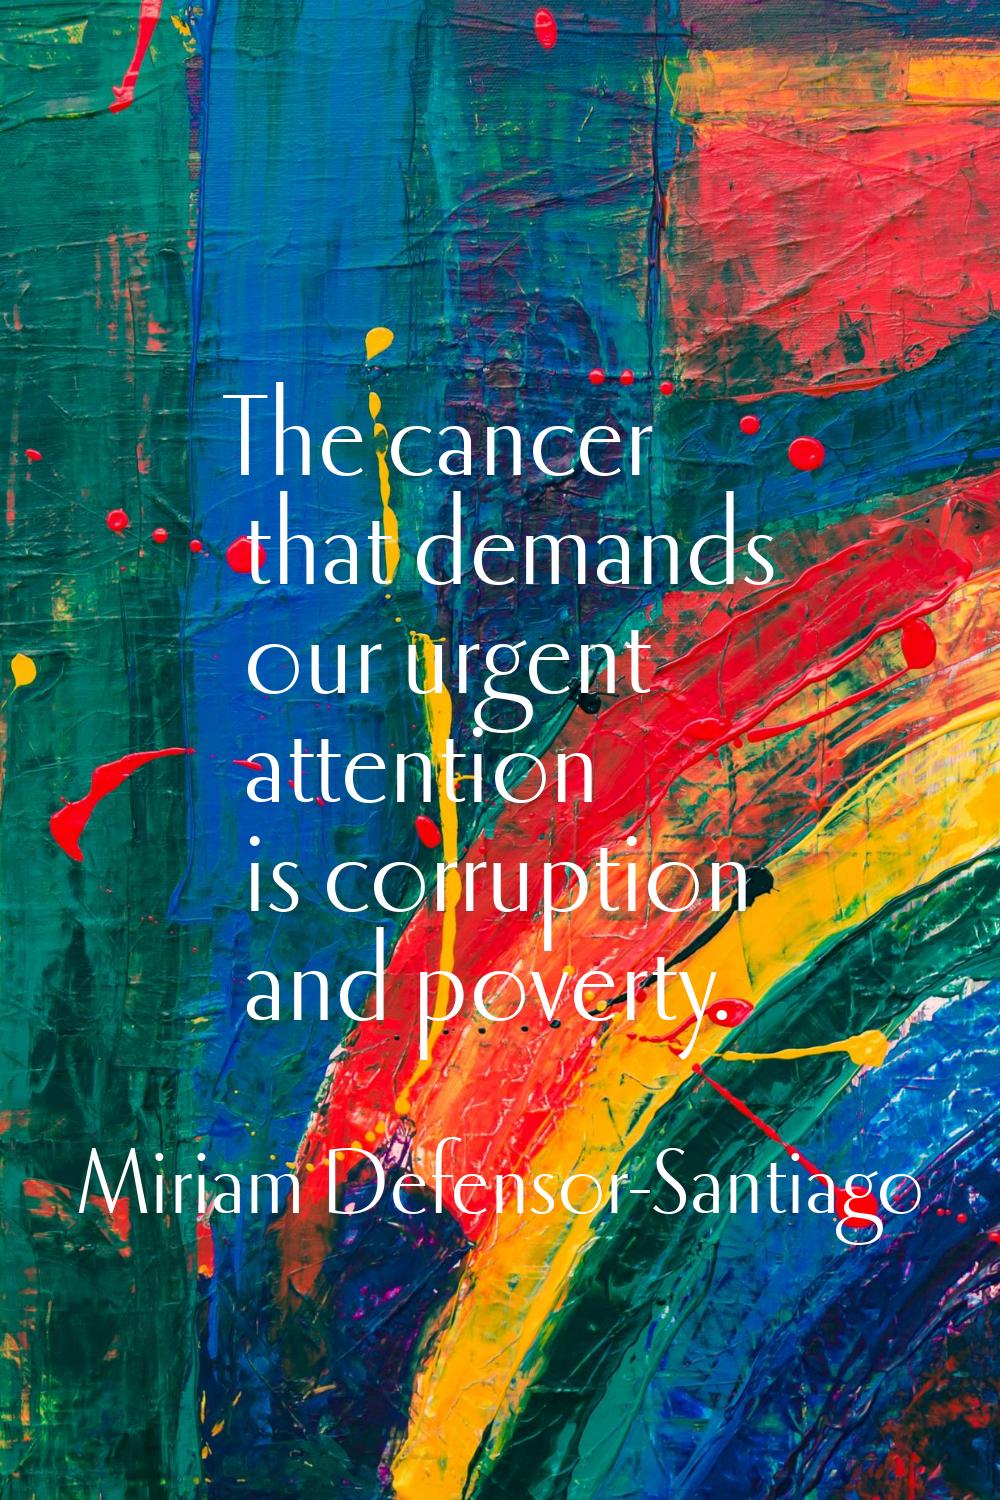 The cancer that demands our urgent attention is corruption and poverty.